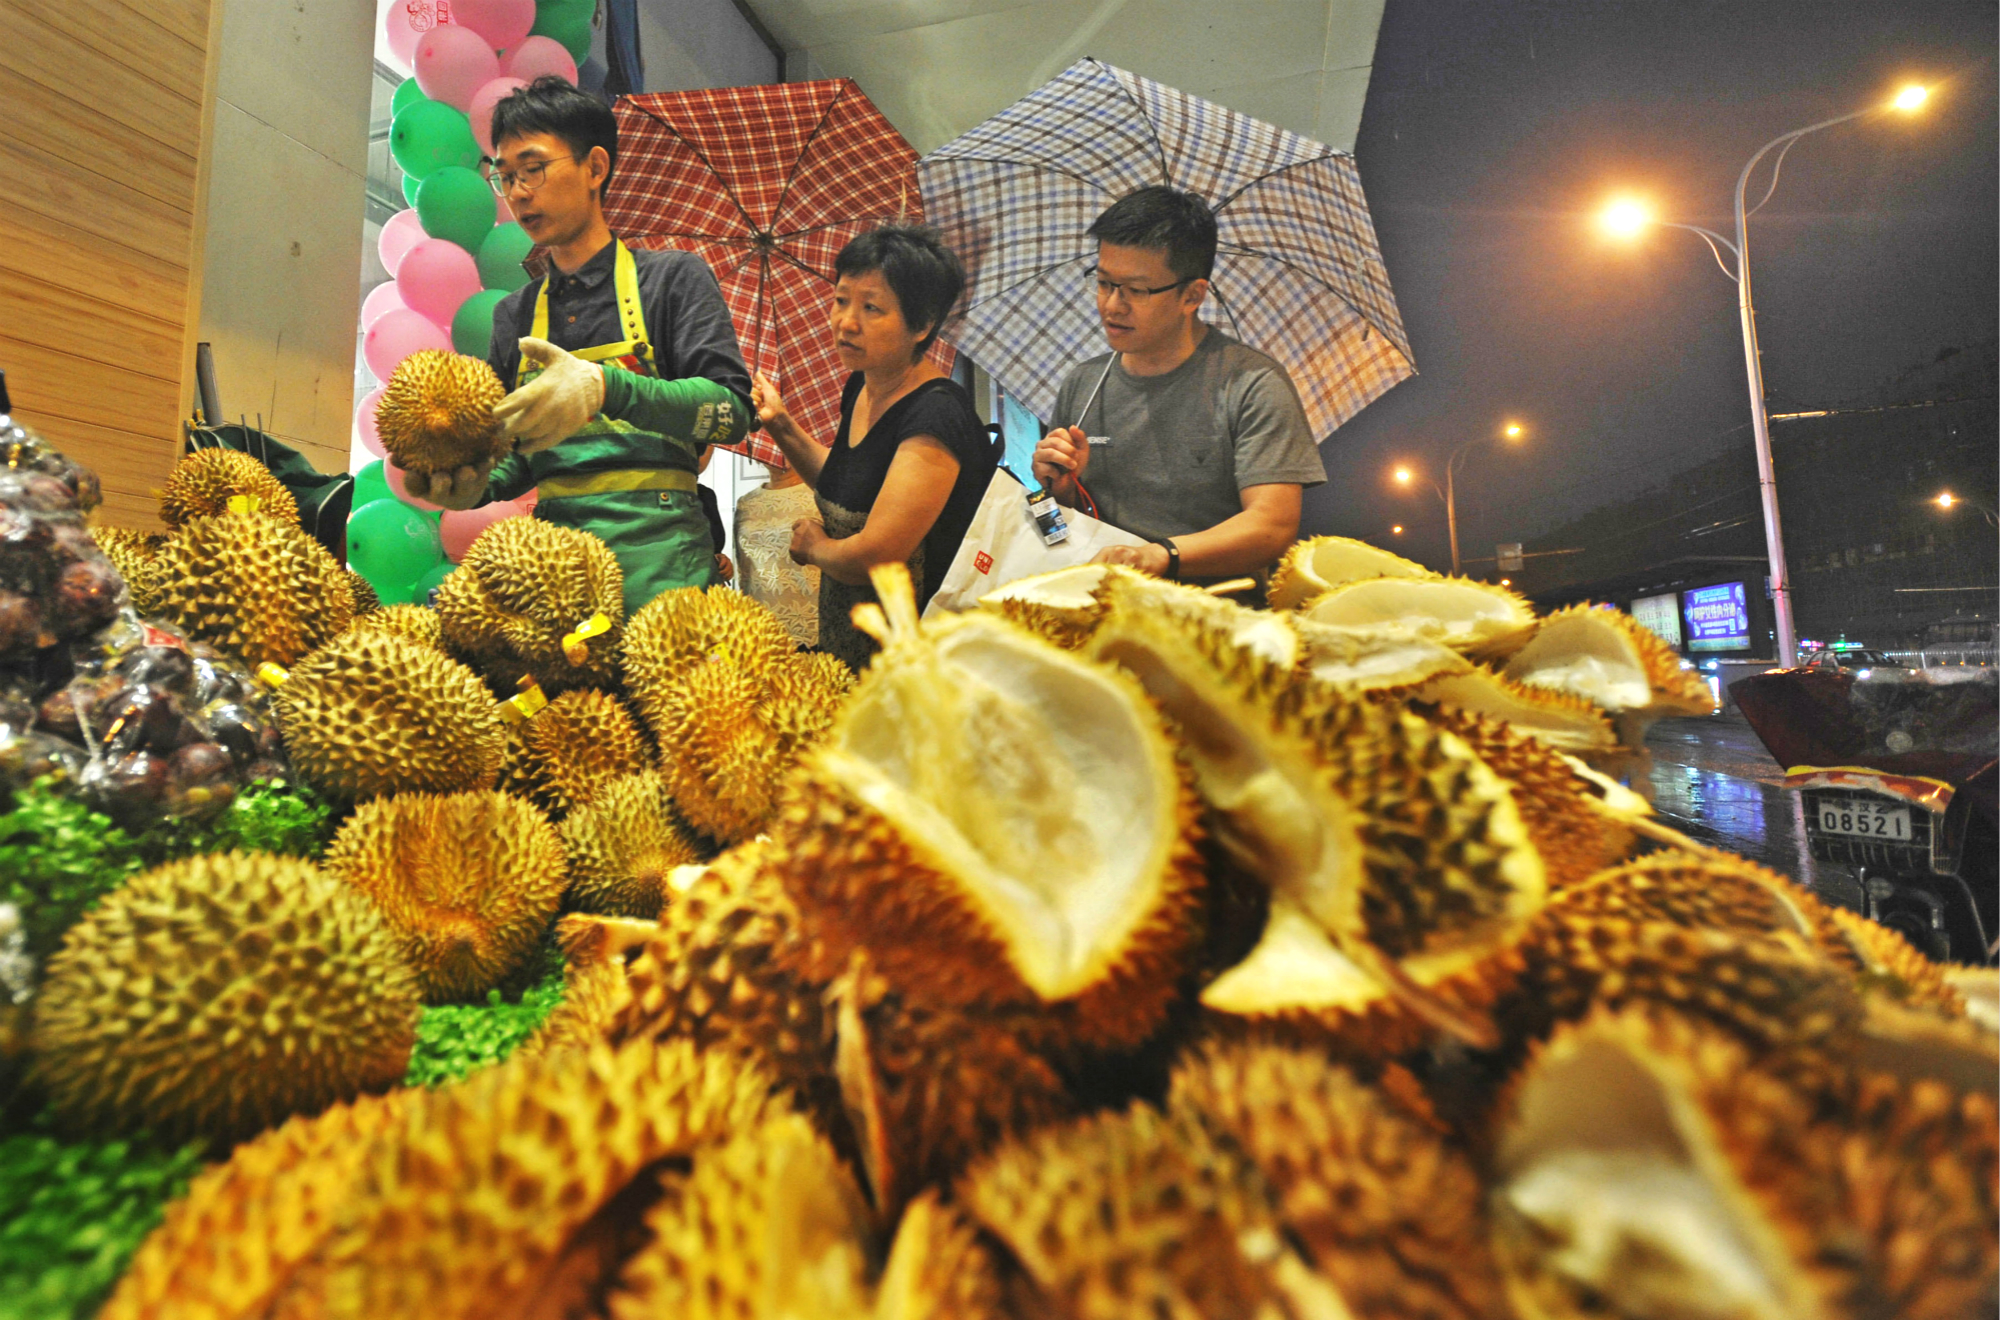 w7pdj1 chinese consumers wait in line to buy golden pillow durians web